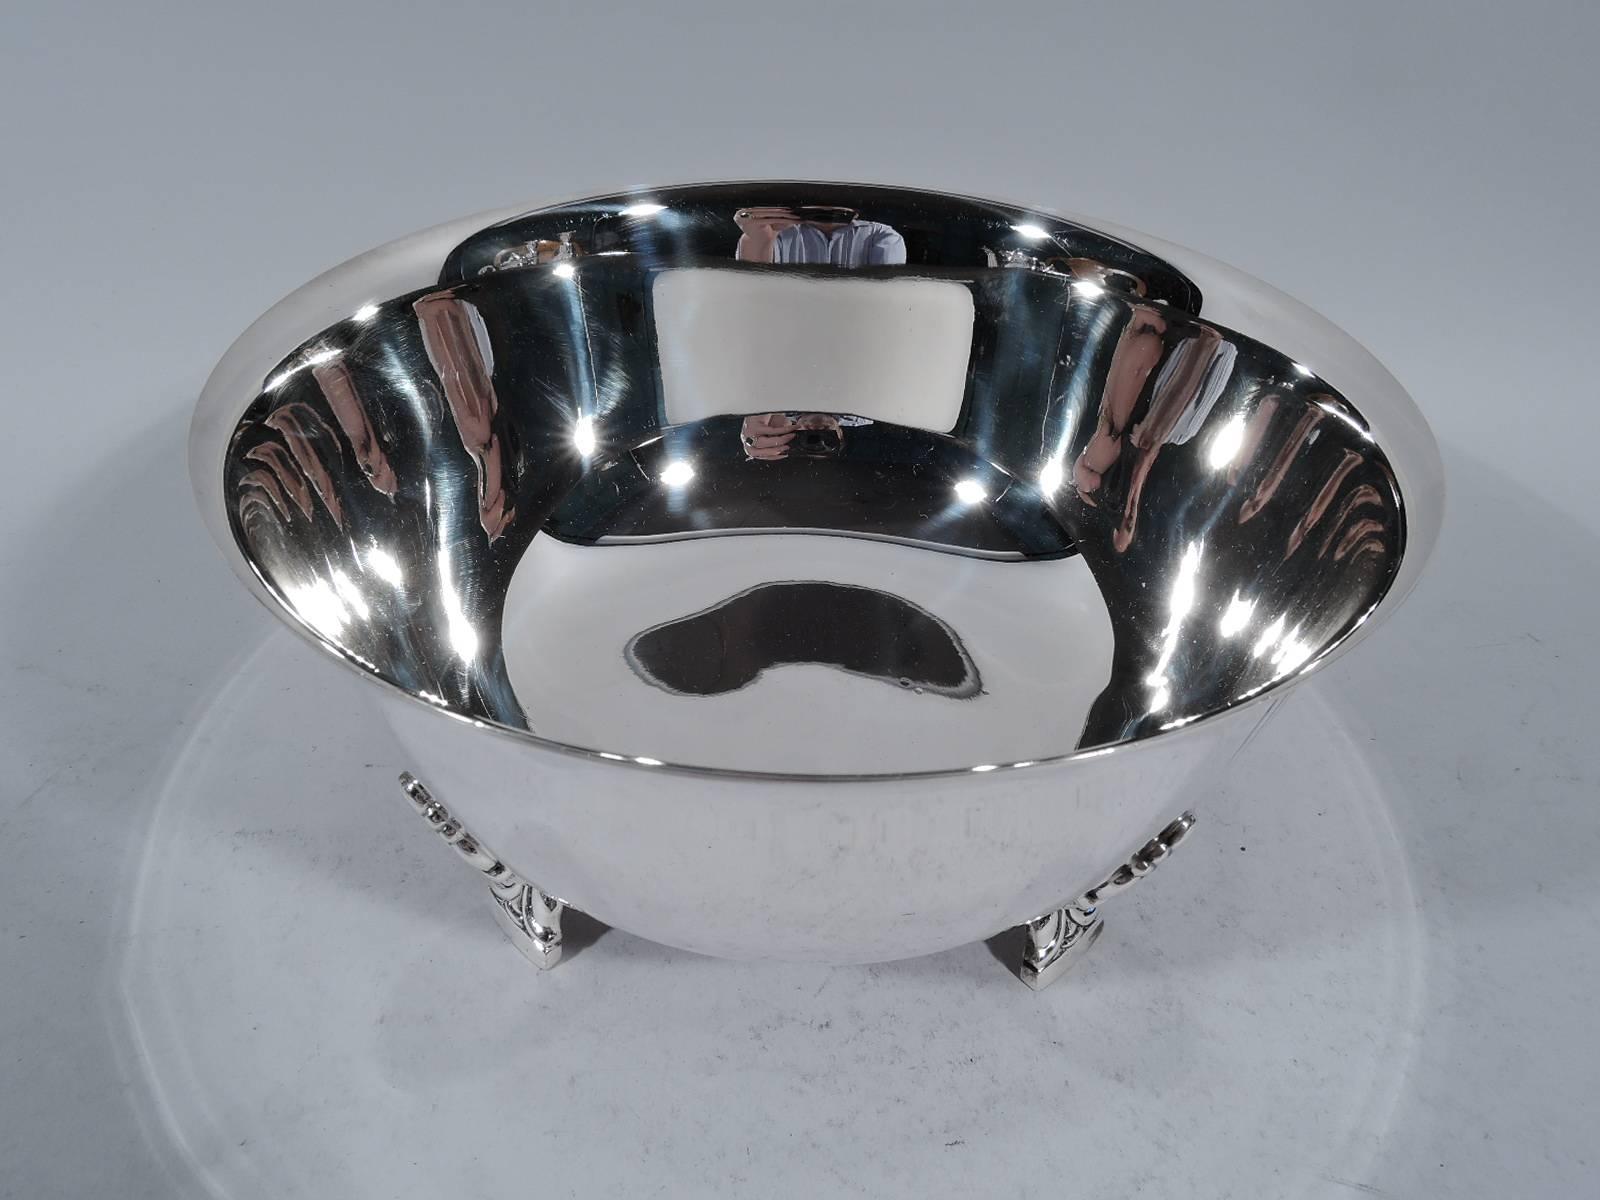 Sterling silver bowl in Palmette pattern. Made by Tiffany & Co. in New York. Curved sides and flared rim. Rests on 4 stylized floral supports. Each support radiates three incised and tapering lines. An early piece in this pattern, which was first